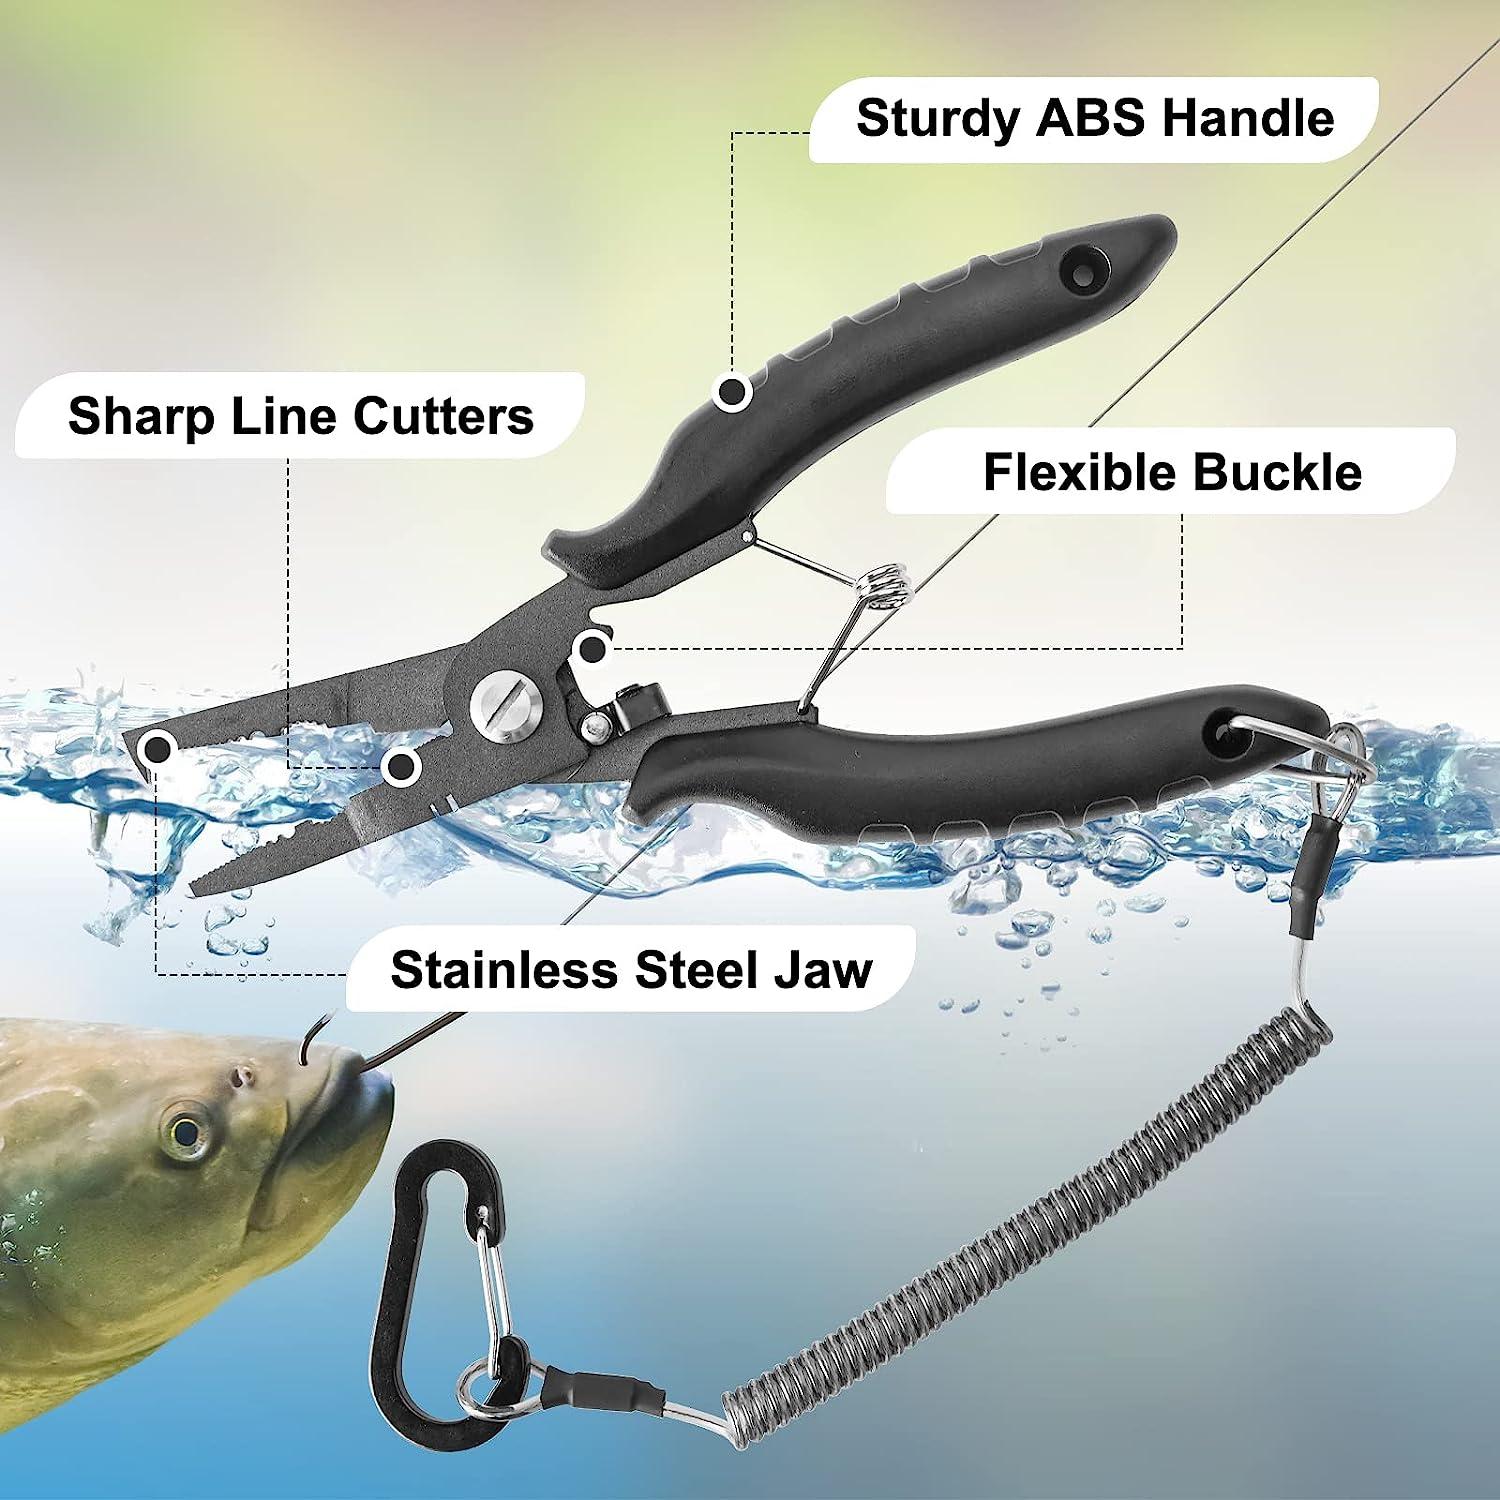 Fish Tackle Fish Lip Stainless Steel Control Snip Fishing Grip